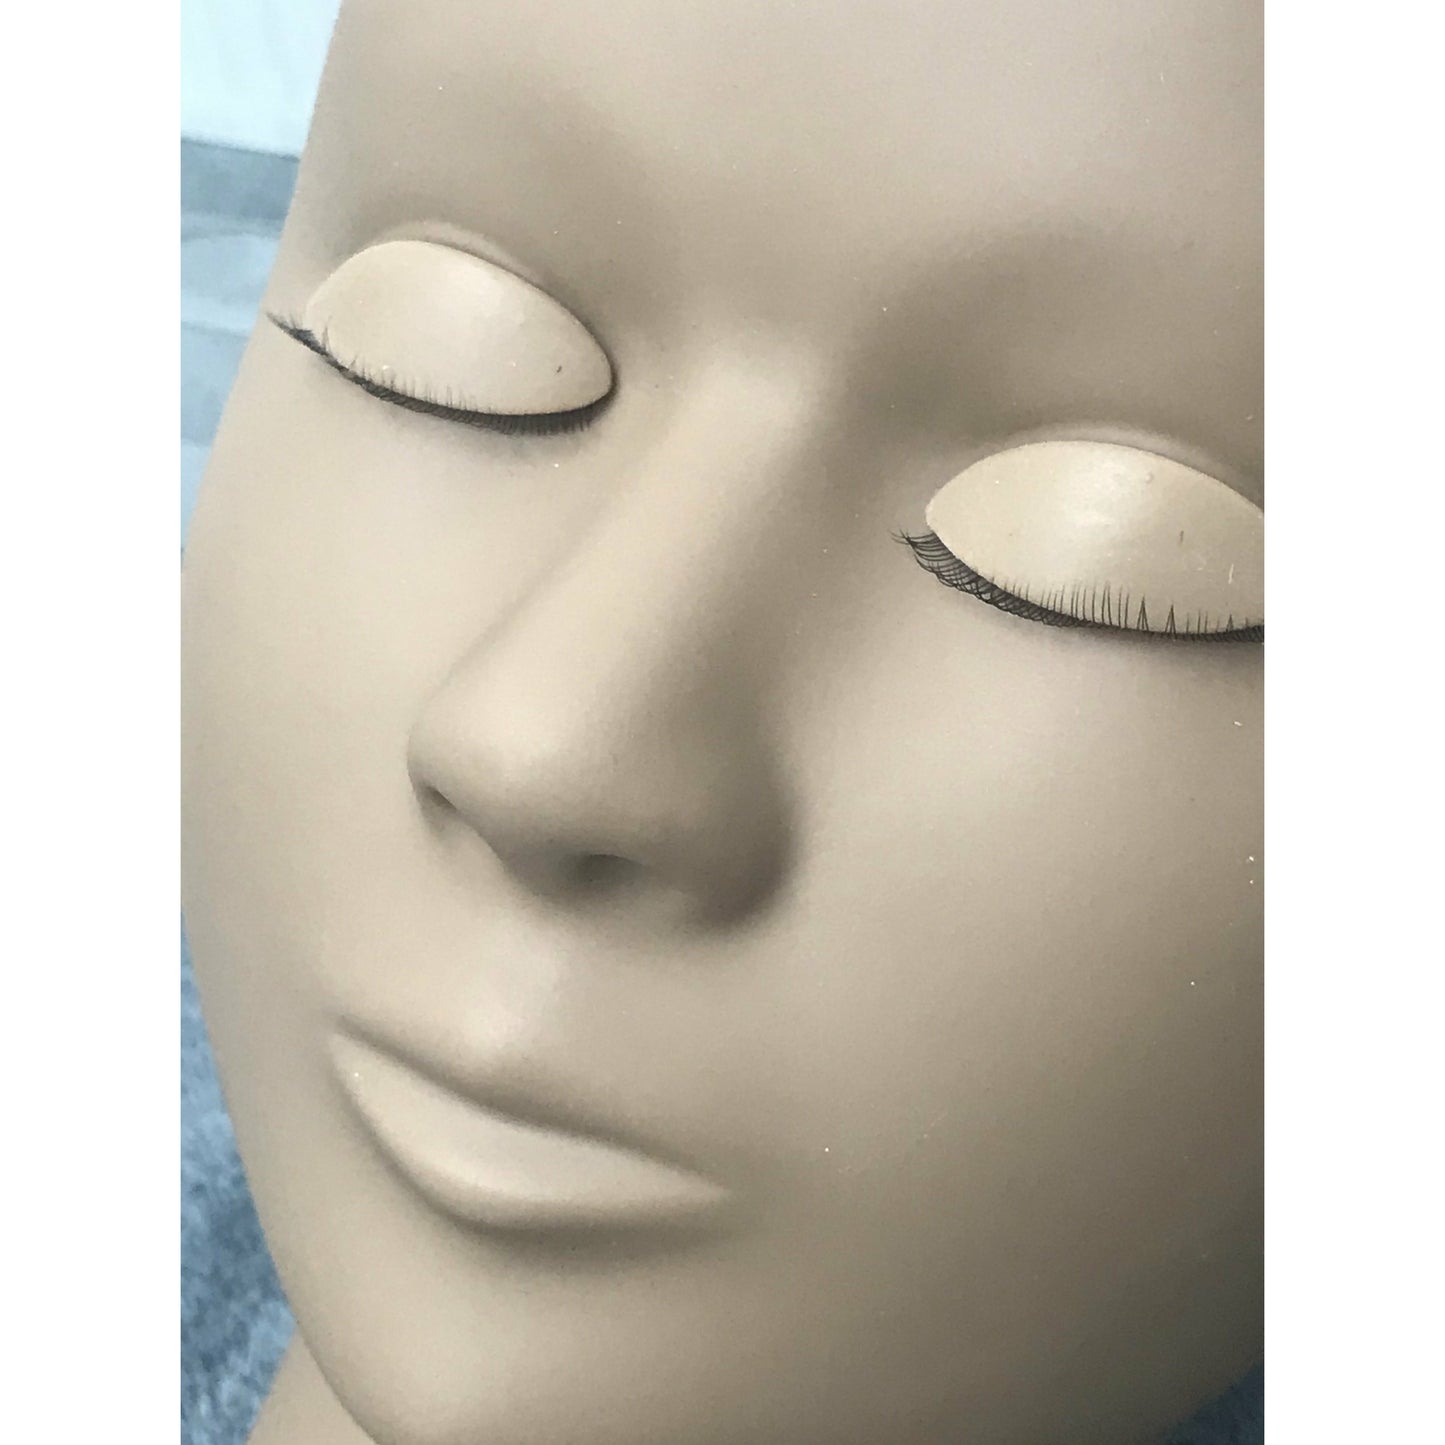 New Eyelash Practice Mannequin with 3 sets of removable eyes.